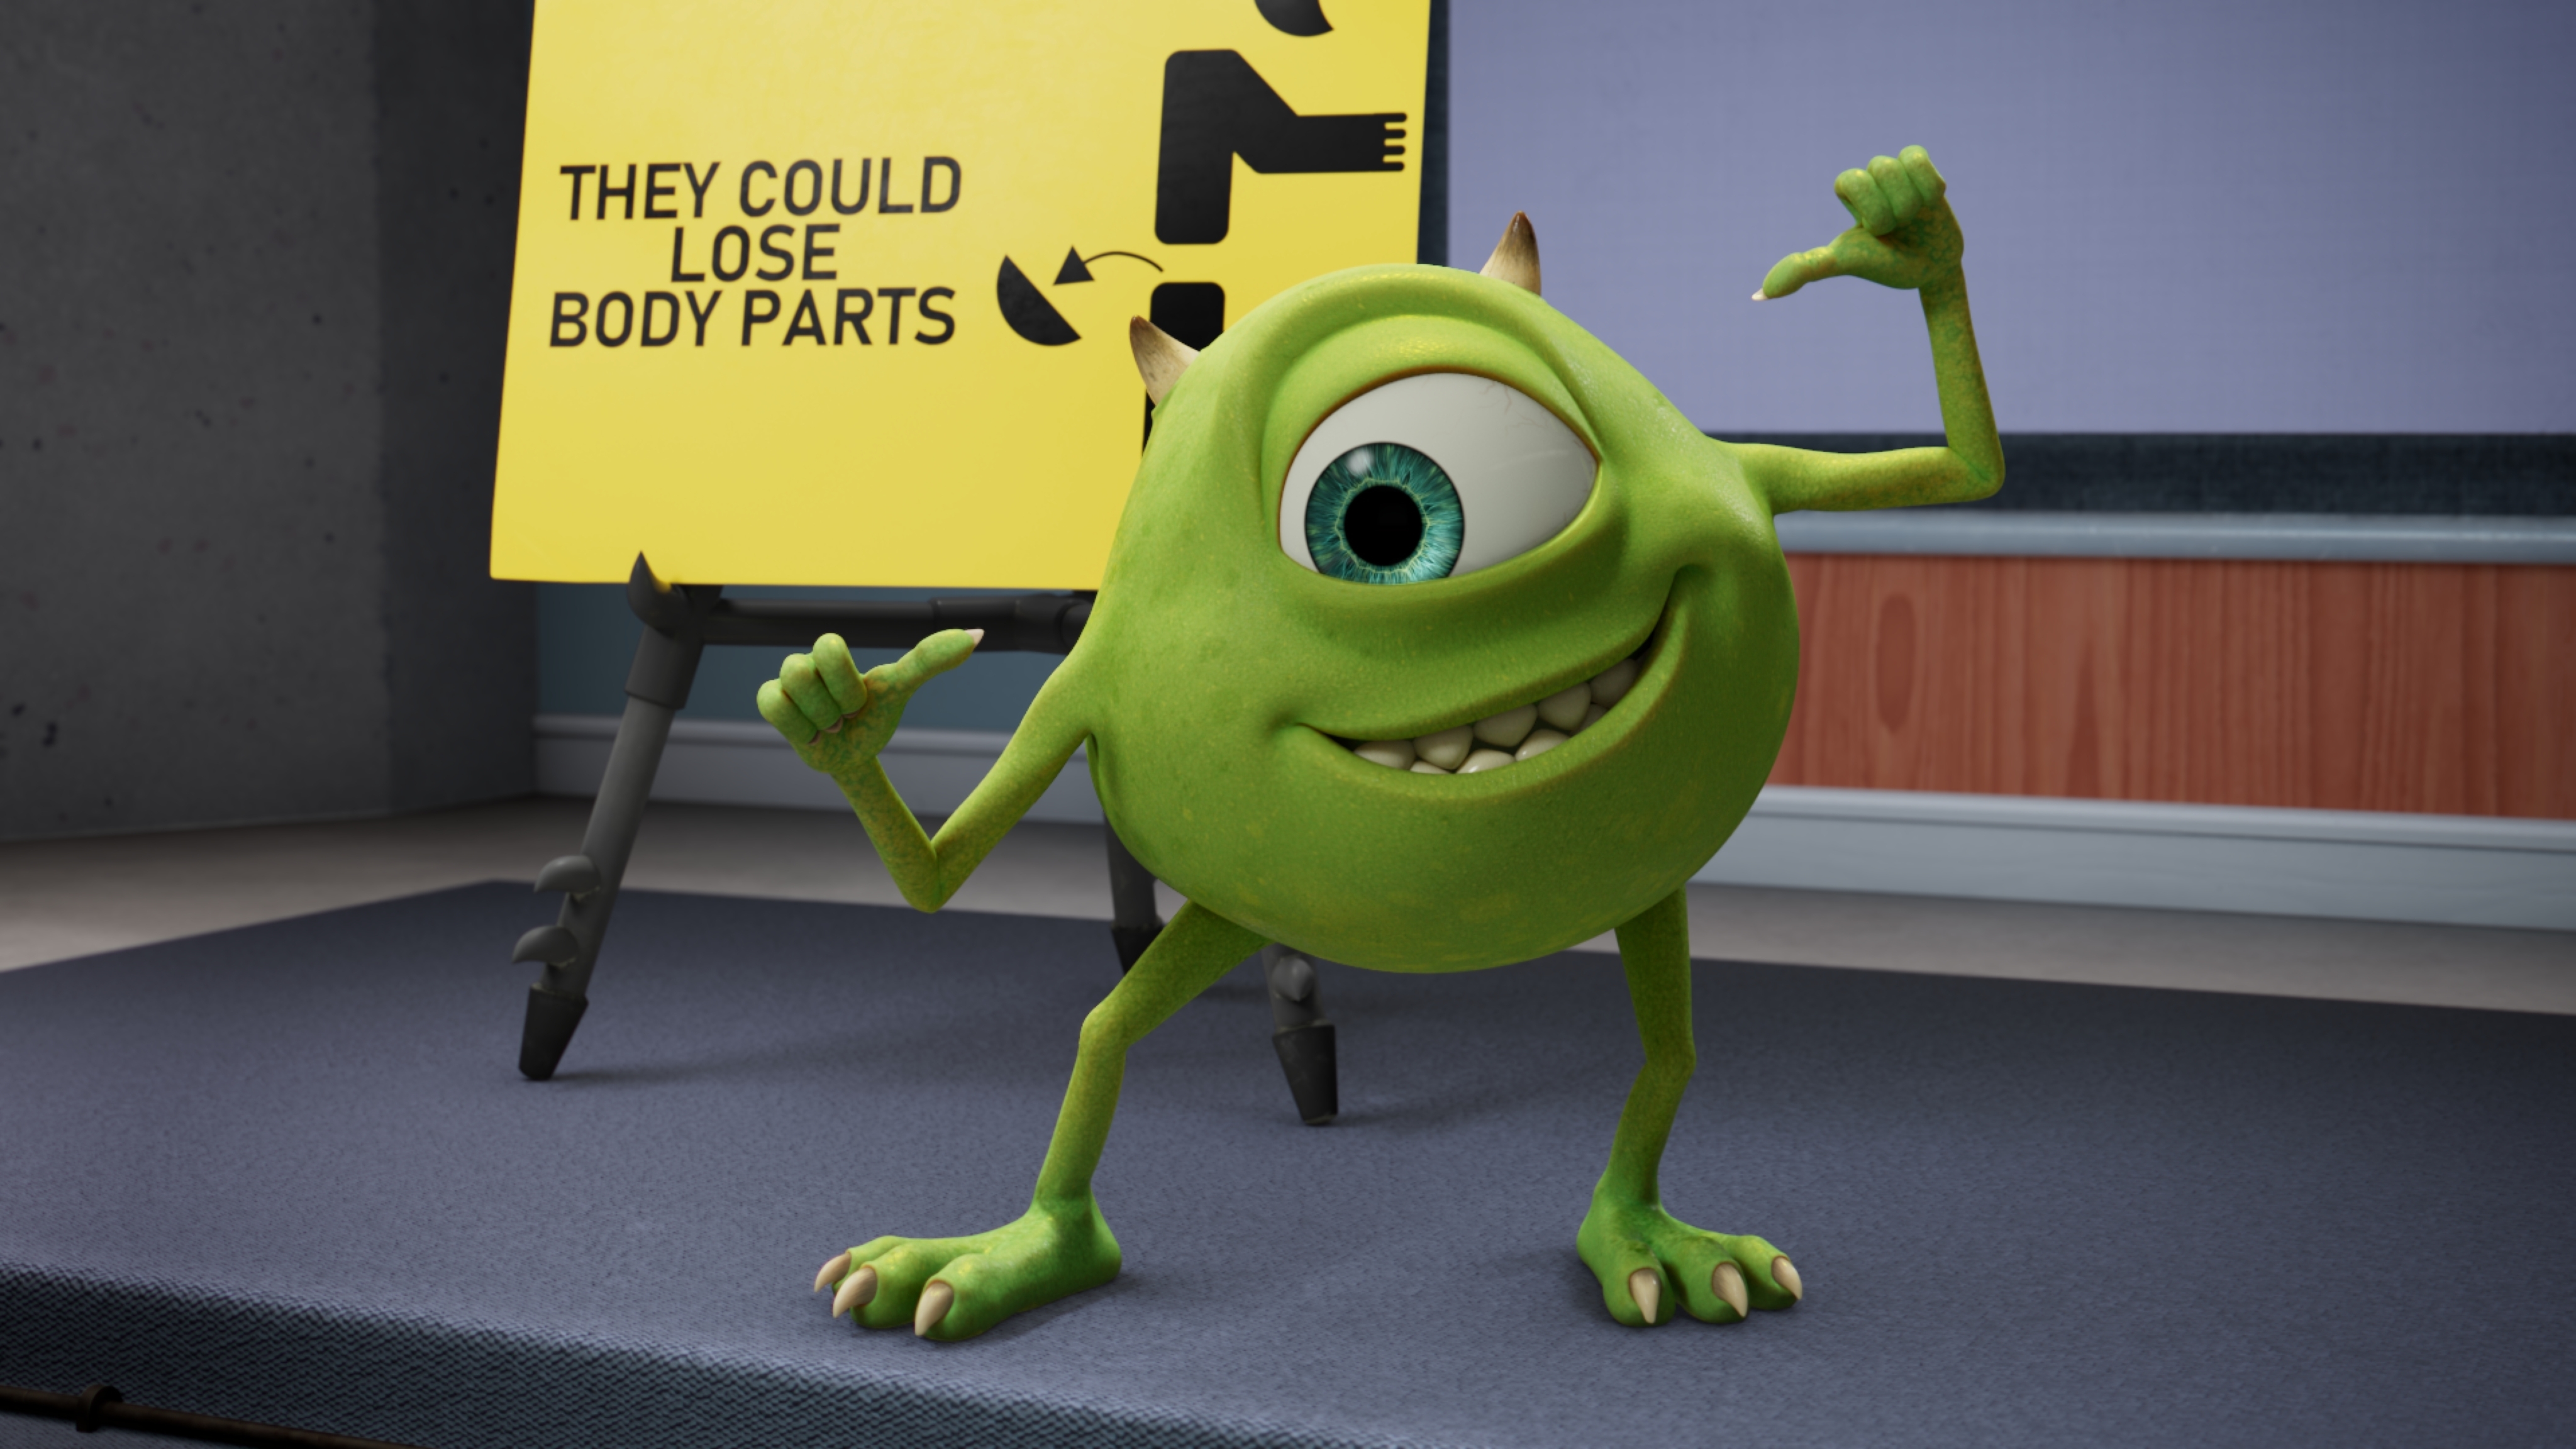 Monsters, Inc. scares up Disney+ spinoff Monsters at Work with